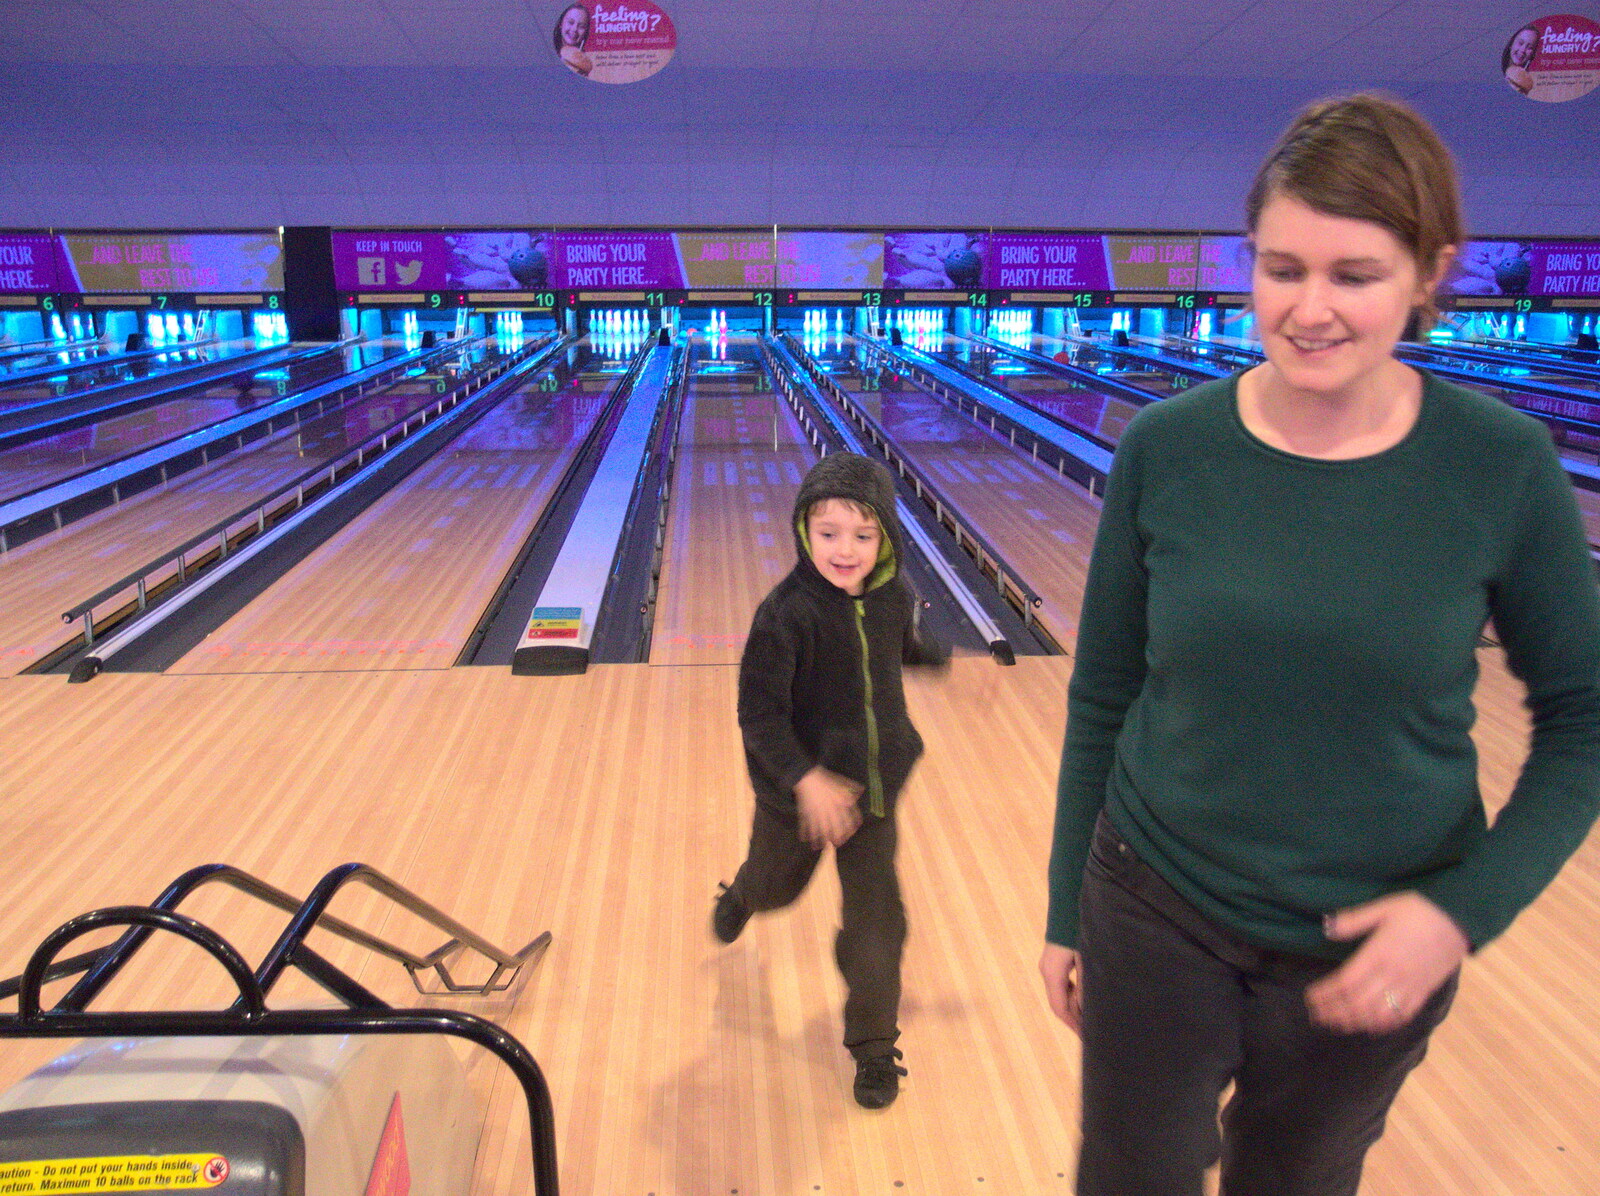 Fred runs around after a bowl from Ten-Pin Bowling, Riverside, Norwich - 3rd January 2016